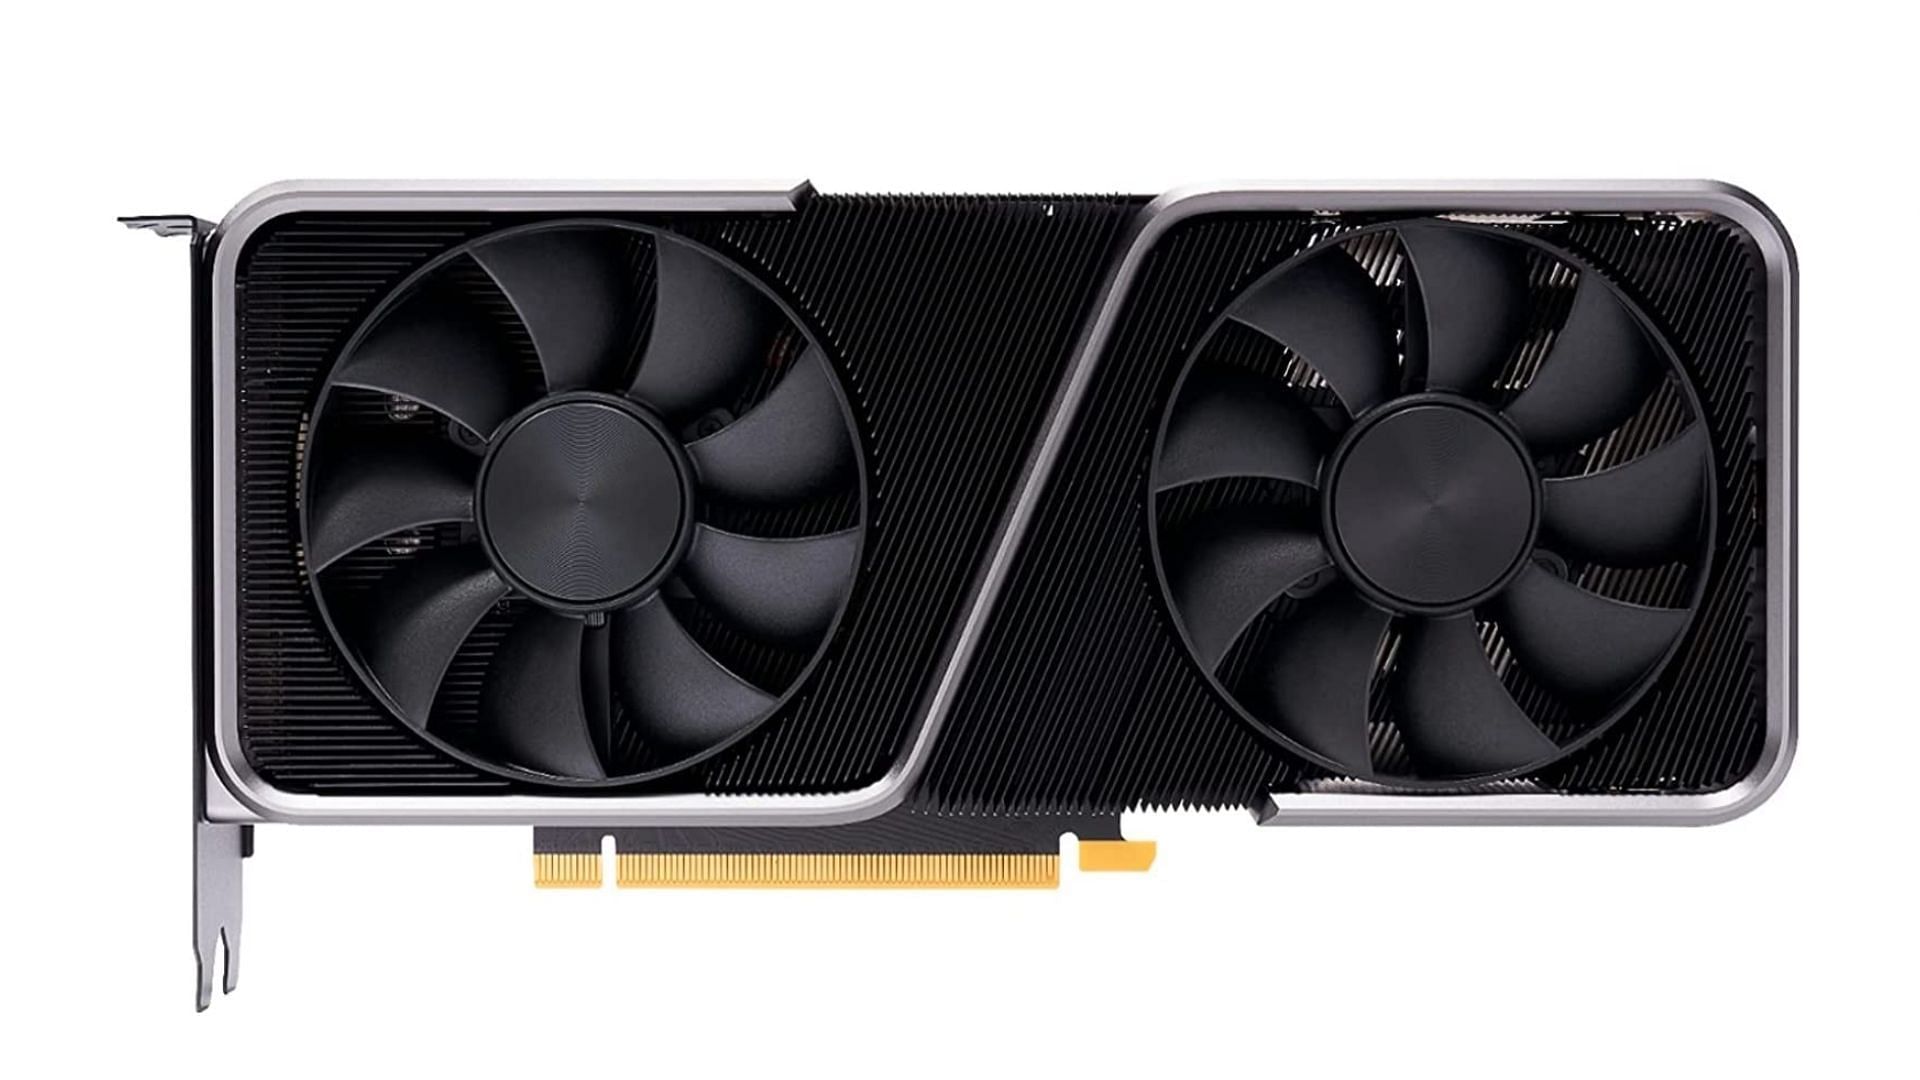 The RTX 3070 Founder